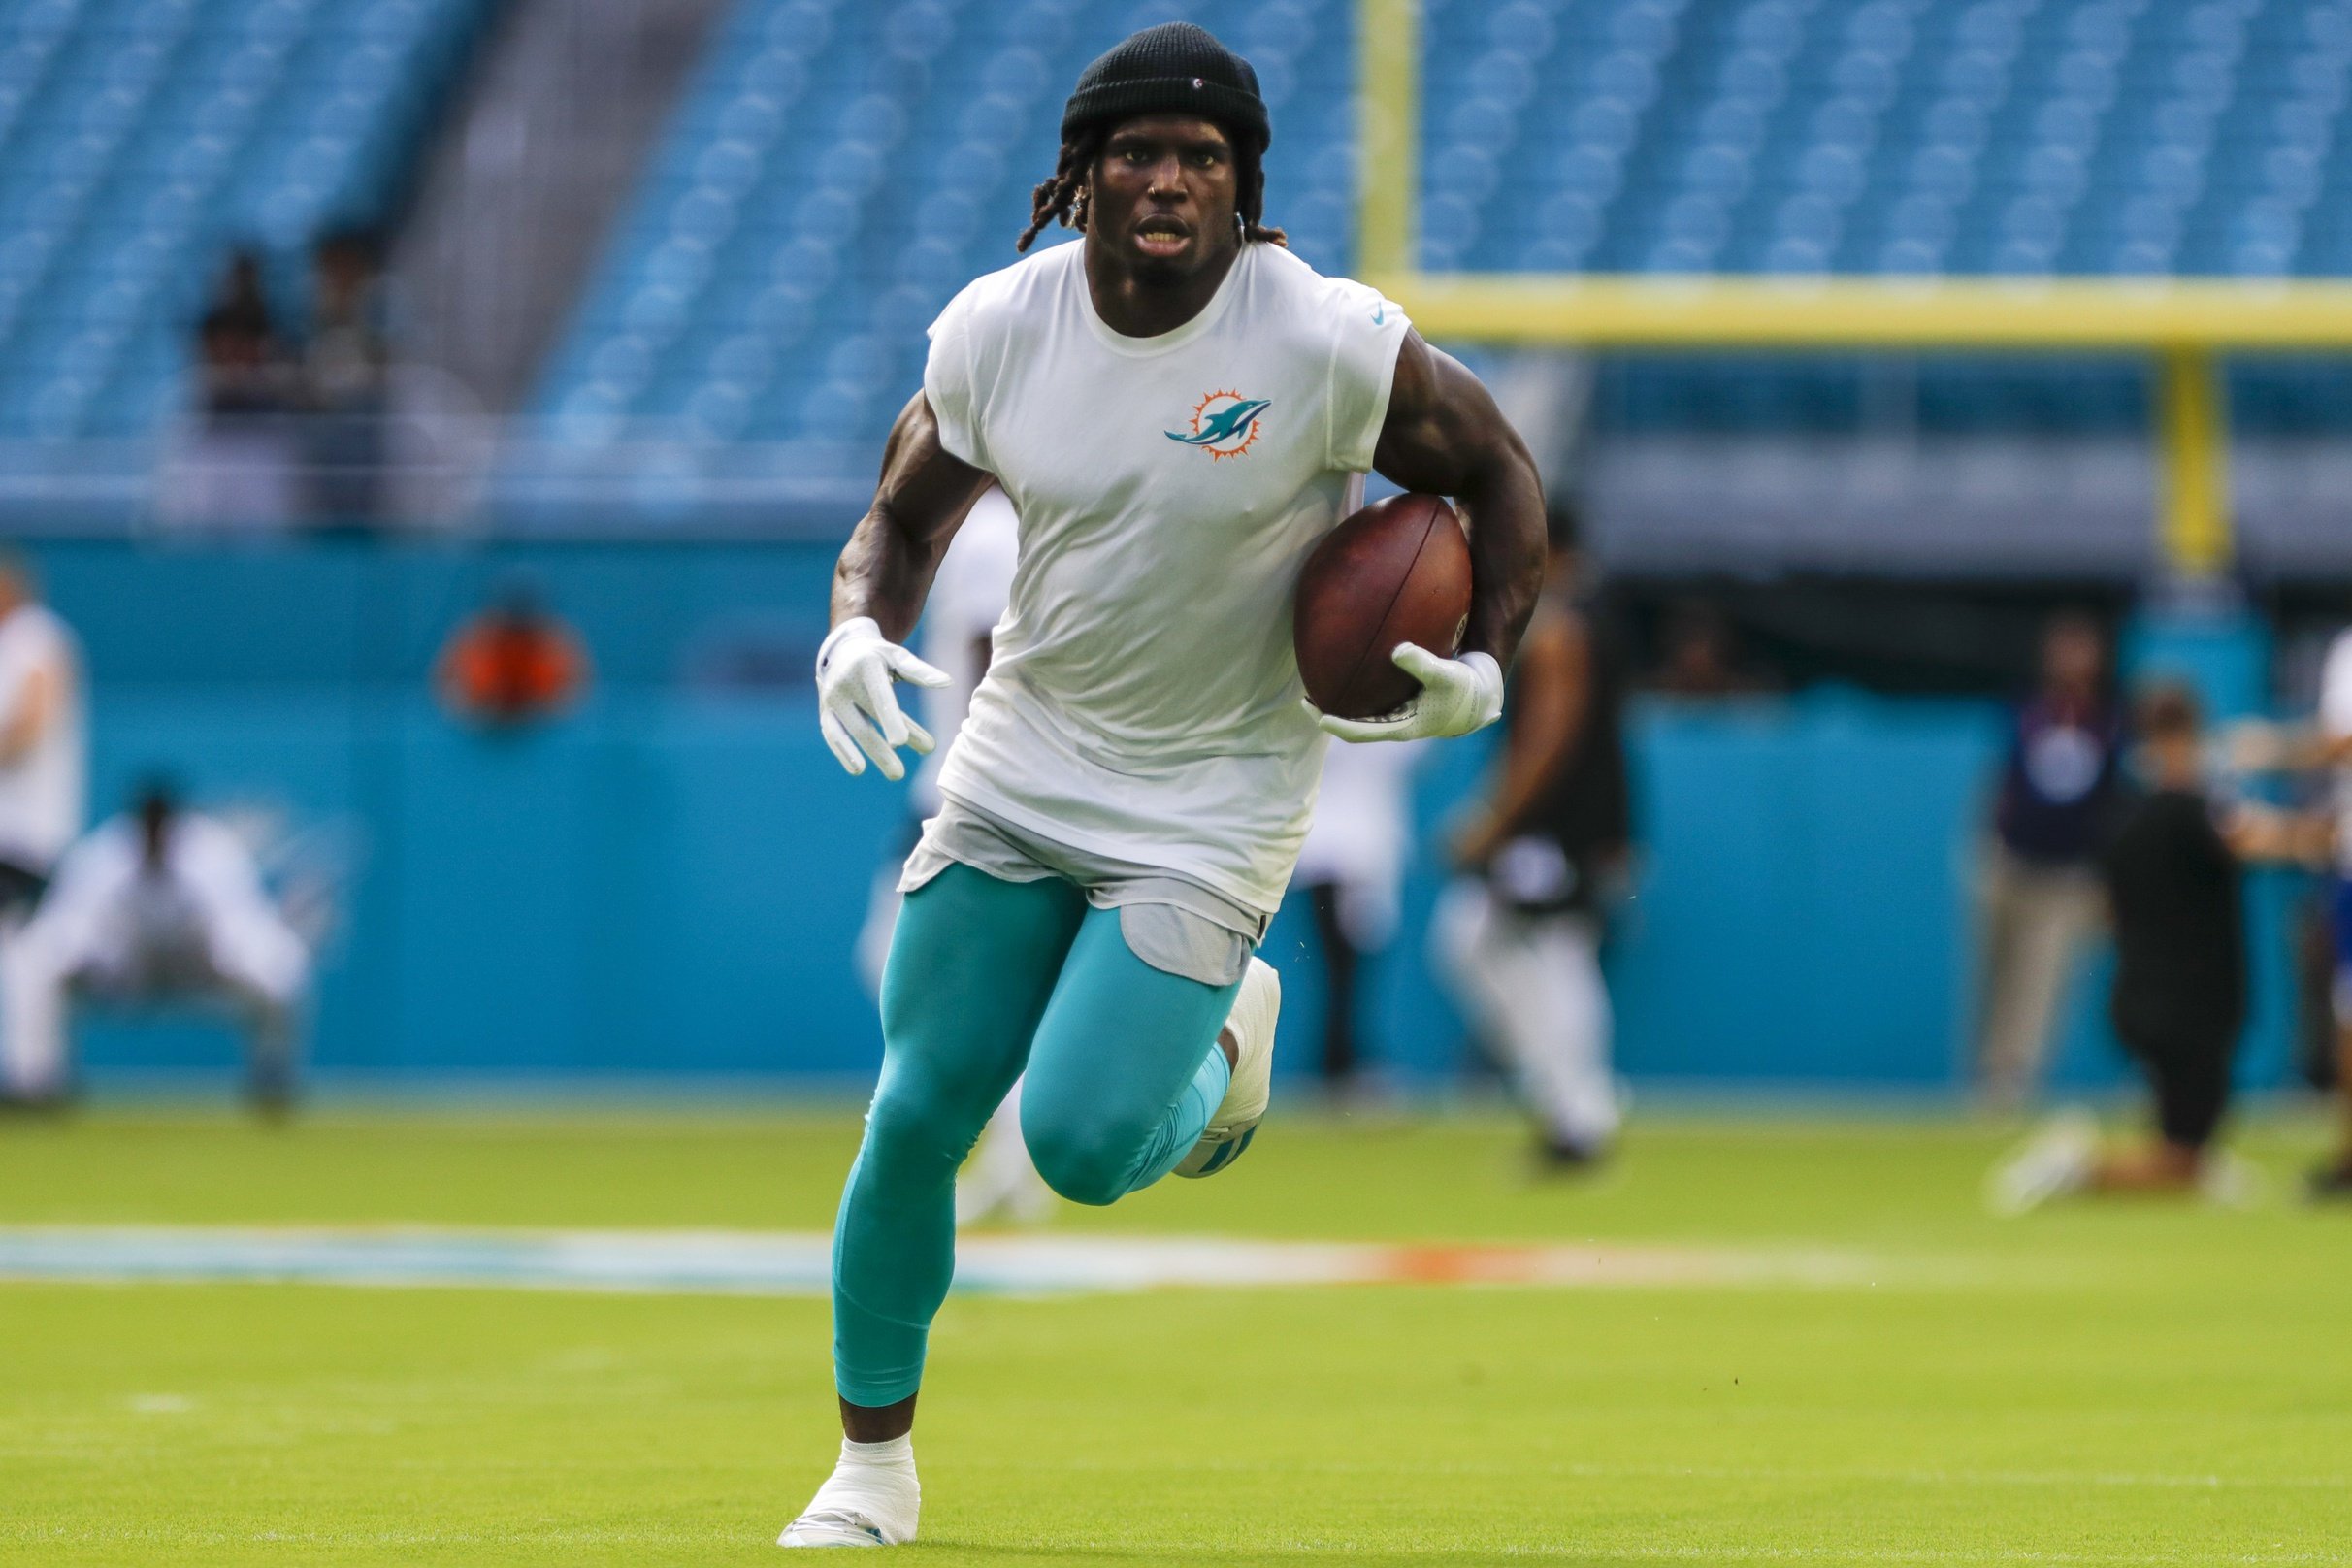 With Tyreek Hill in the huddle, anything seems possible for Miami Dolphins